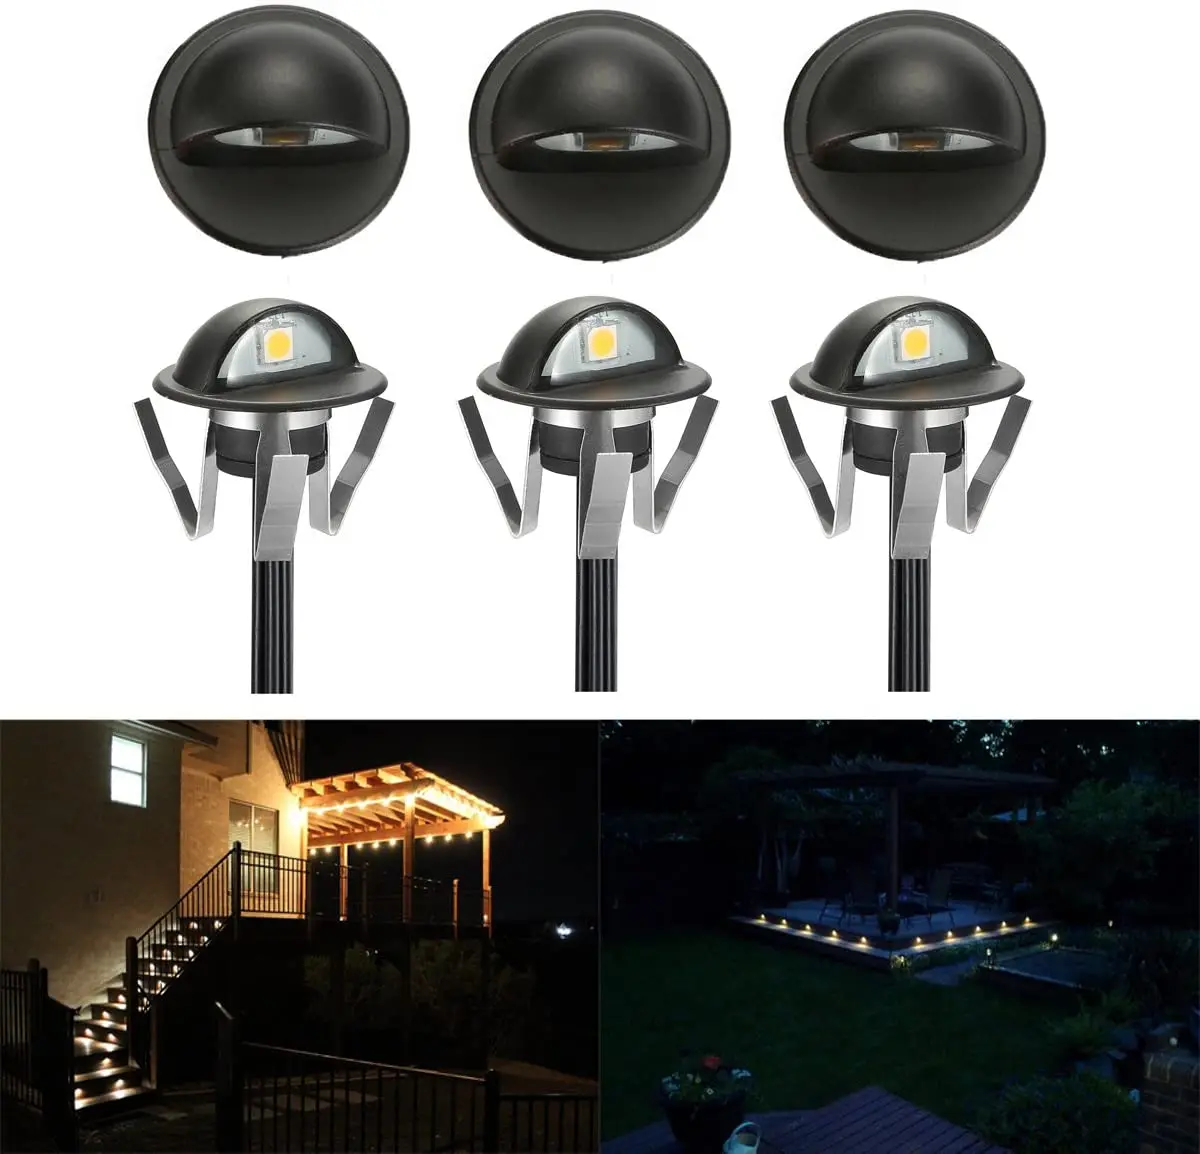 20pcs/set 31mm 12V Kitchen Outdoor Yard Stair Pathway LED Deck Recessed Lights 